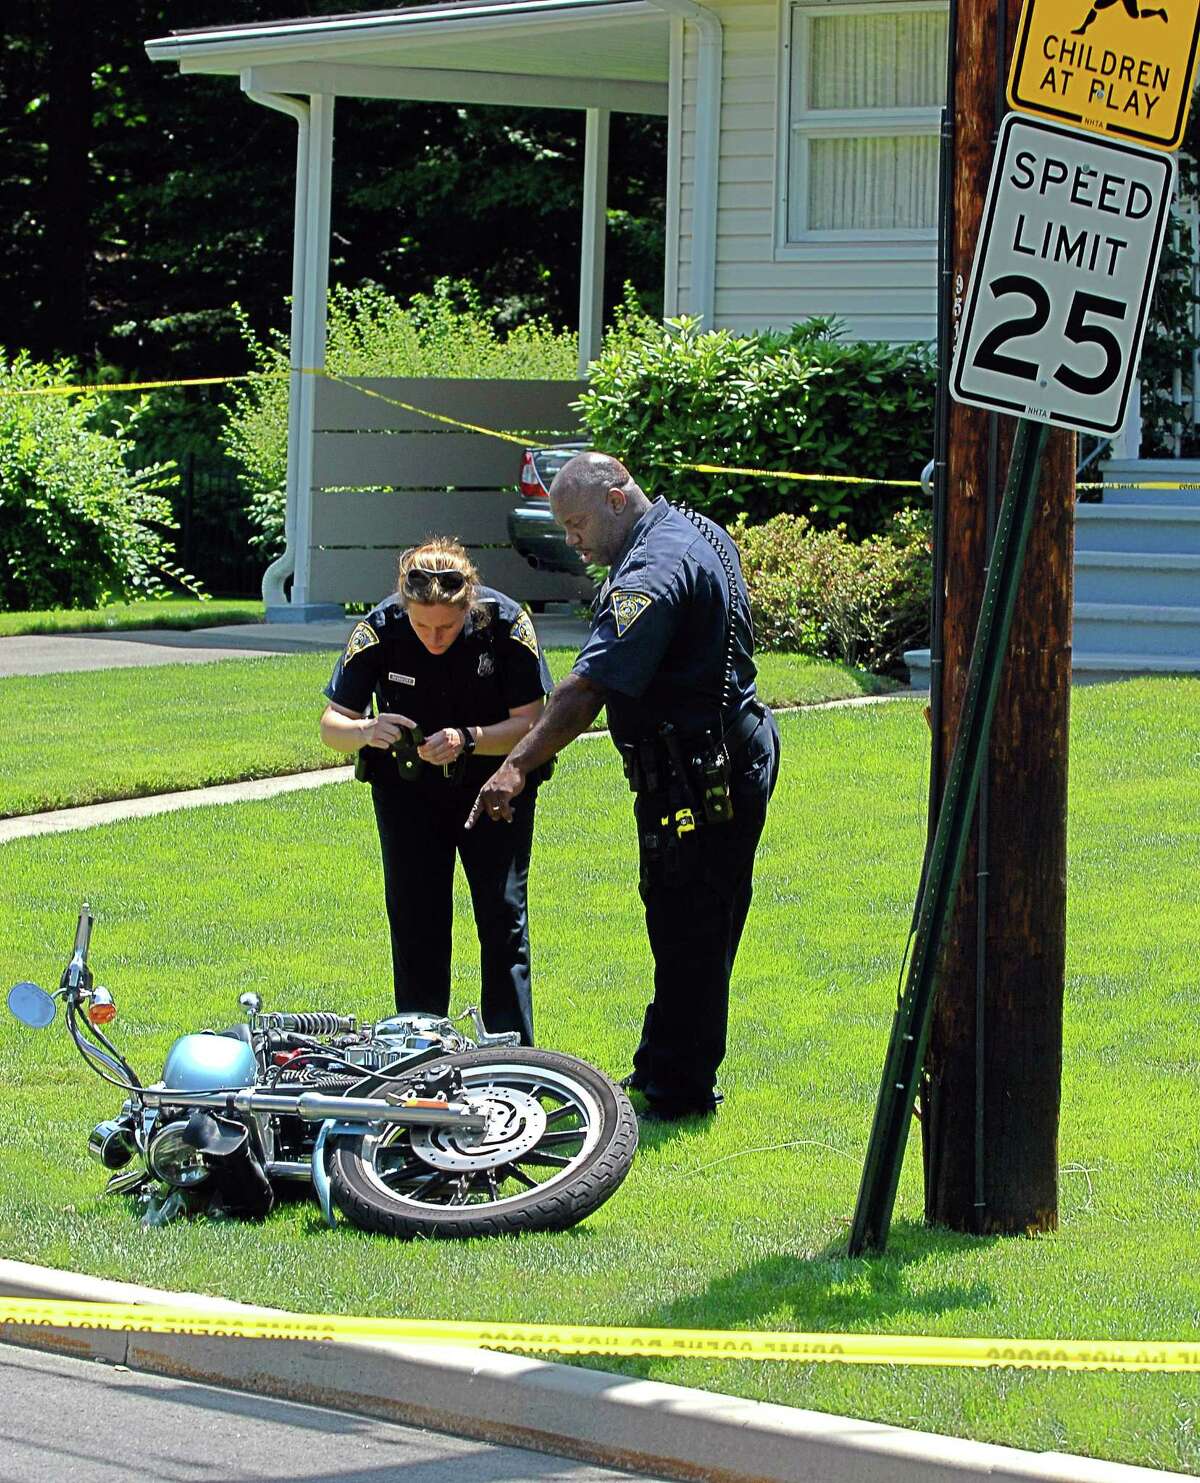 Cas100615 06/15/10 New Haven--New Haven Police Officers Kealyn Nivakoff and Lloyd Barrett investigate the scene of a motorcycle crash that killed a man along Curtis Drive (in front of #220). Photos -Peter Casolino/New Haven Register *